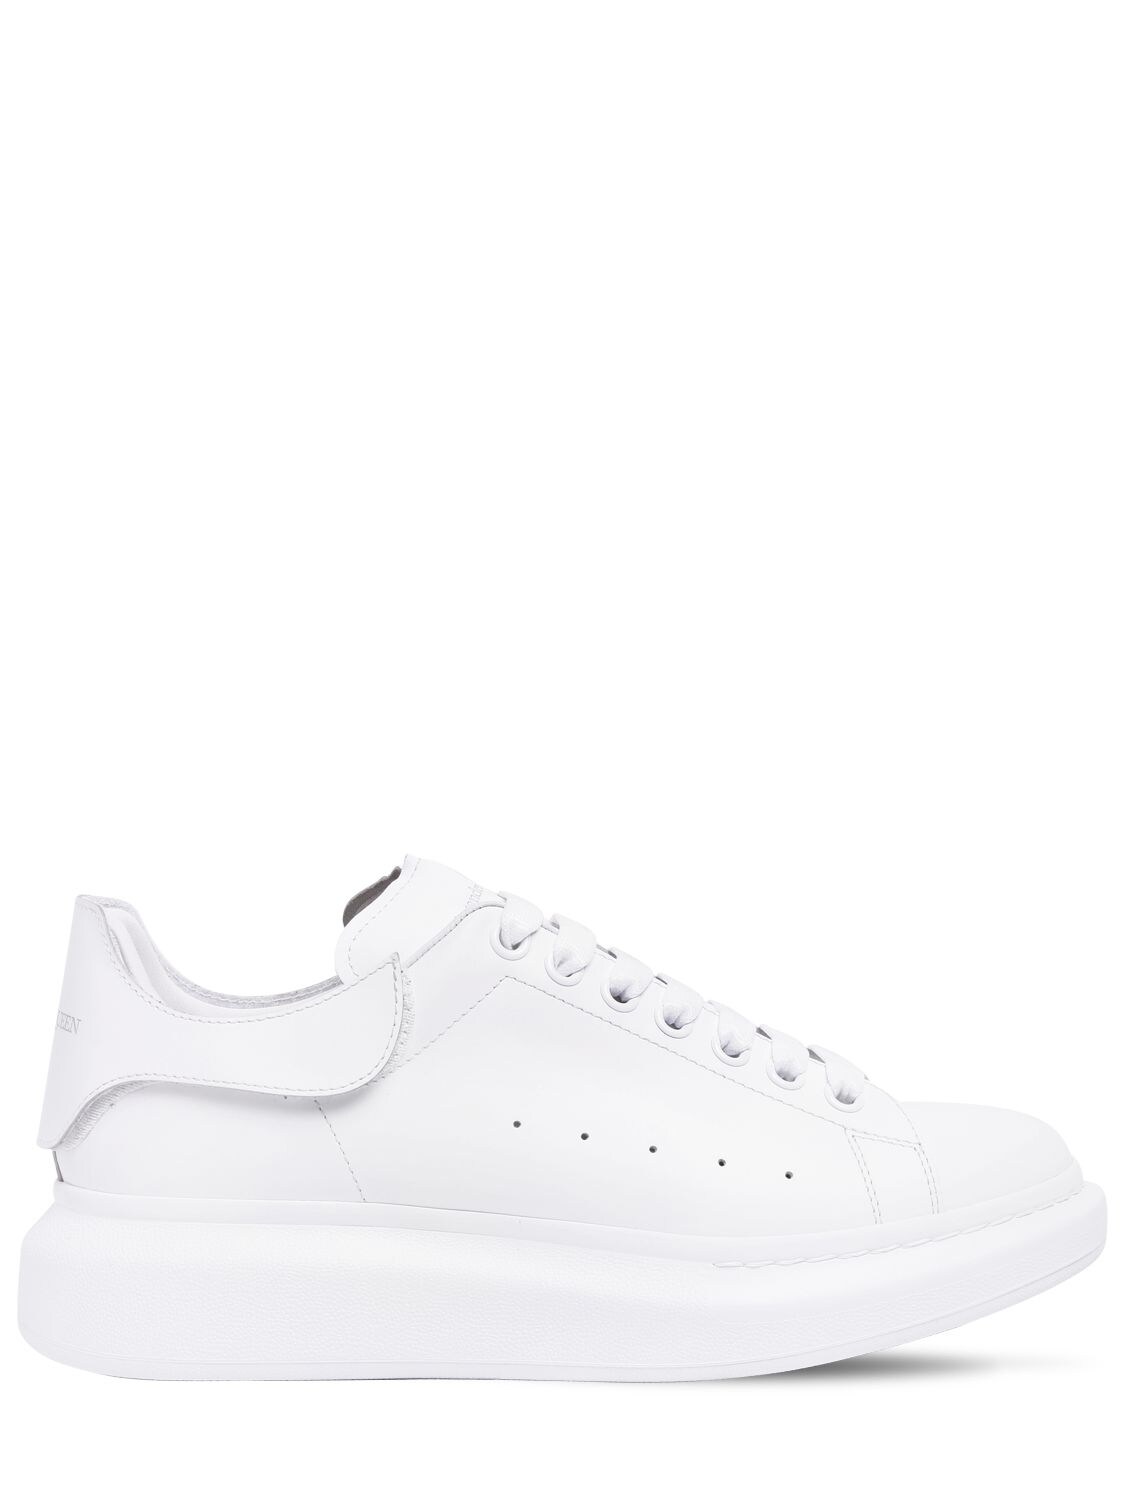 alexander mcqueen white leather sneakers